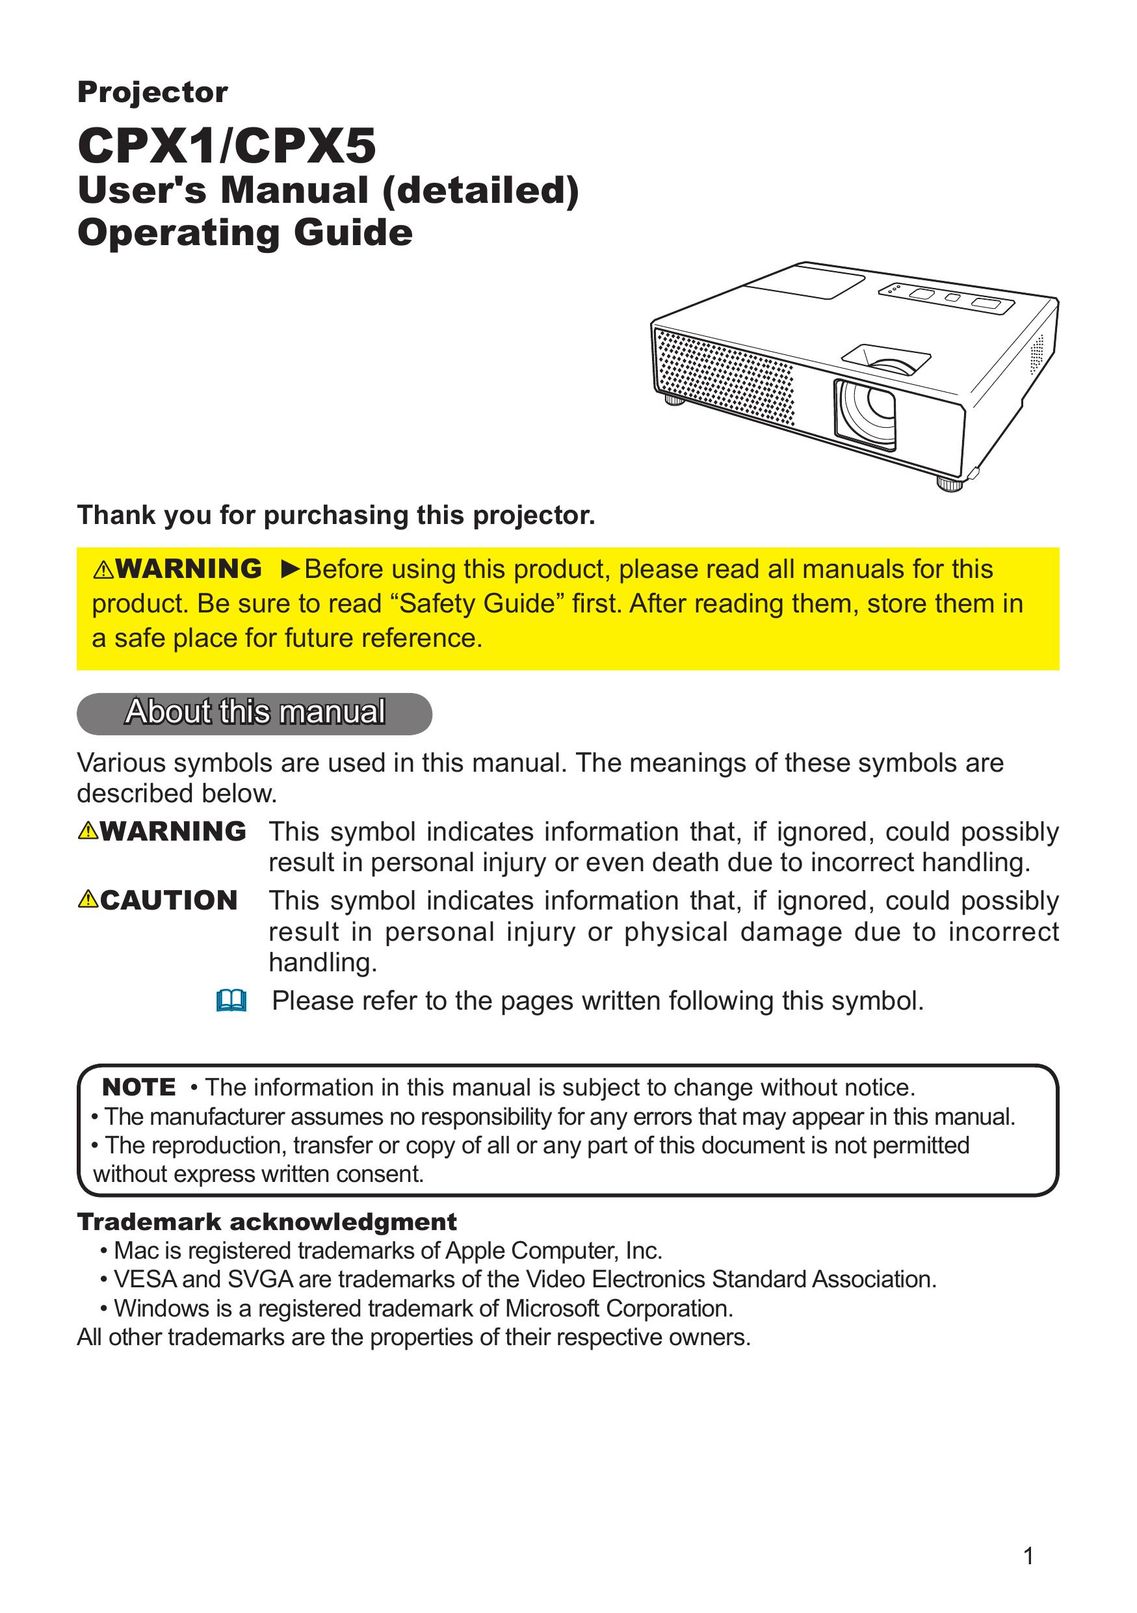 Apple CPX1 Projector User Manual